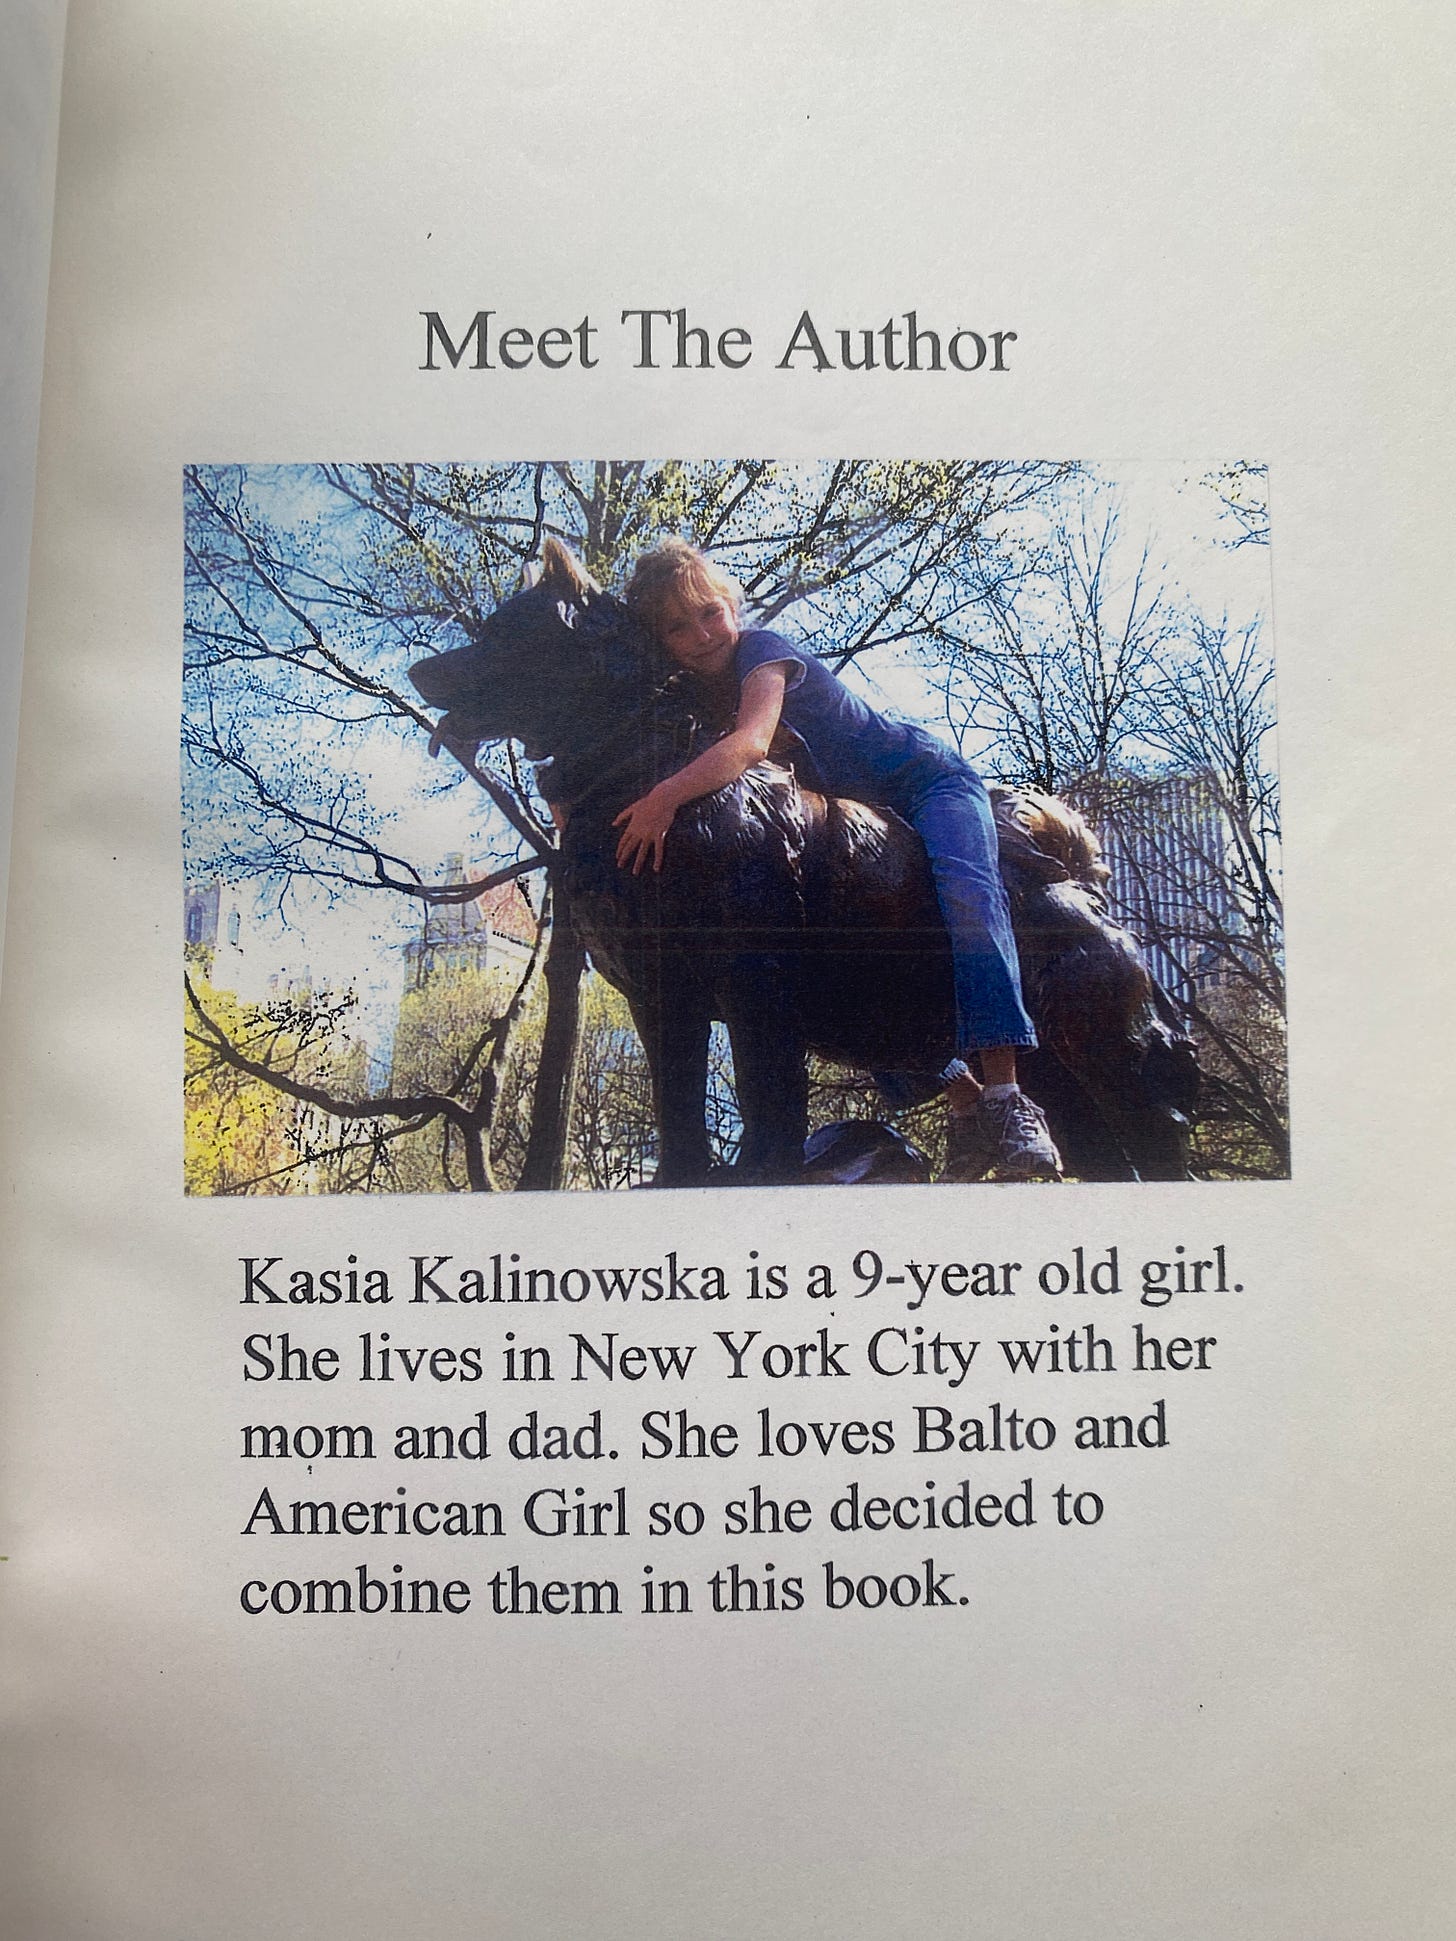 An author bio below a photo of a young girl on a statue of a dog. The author bio reads: Kasia Kalinowska is a 9-year-old girl. She lives in New York City with her mom and dad. She loves Balto and American Girl so she decided to combine them in this book.